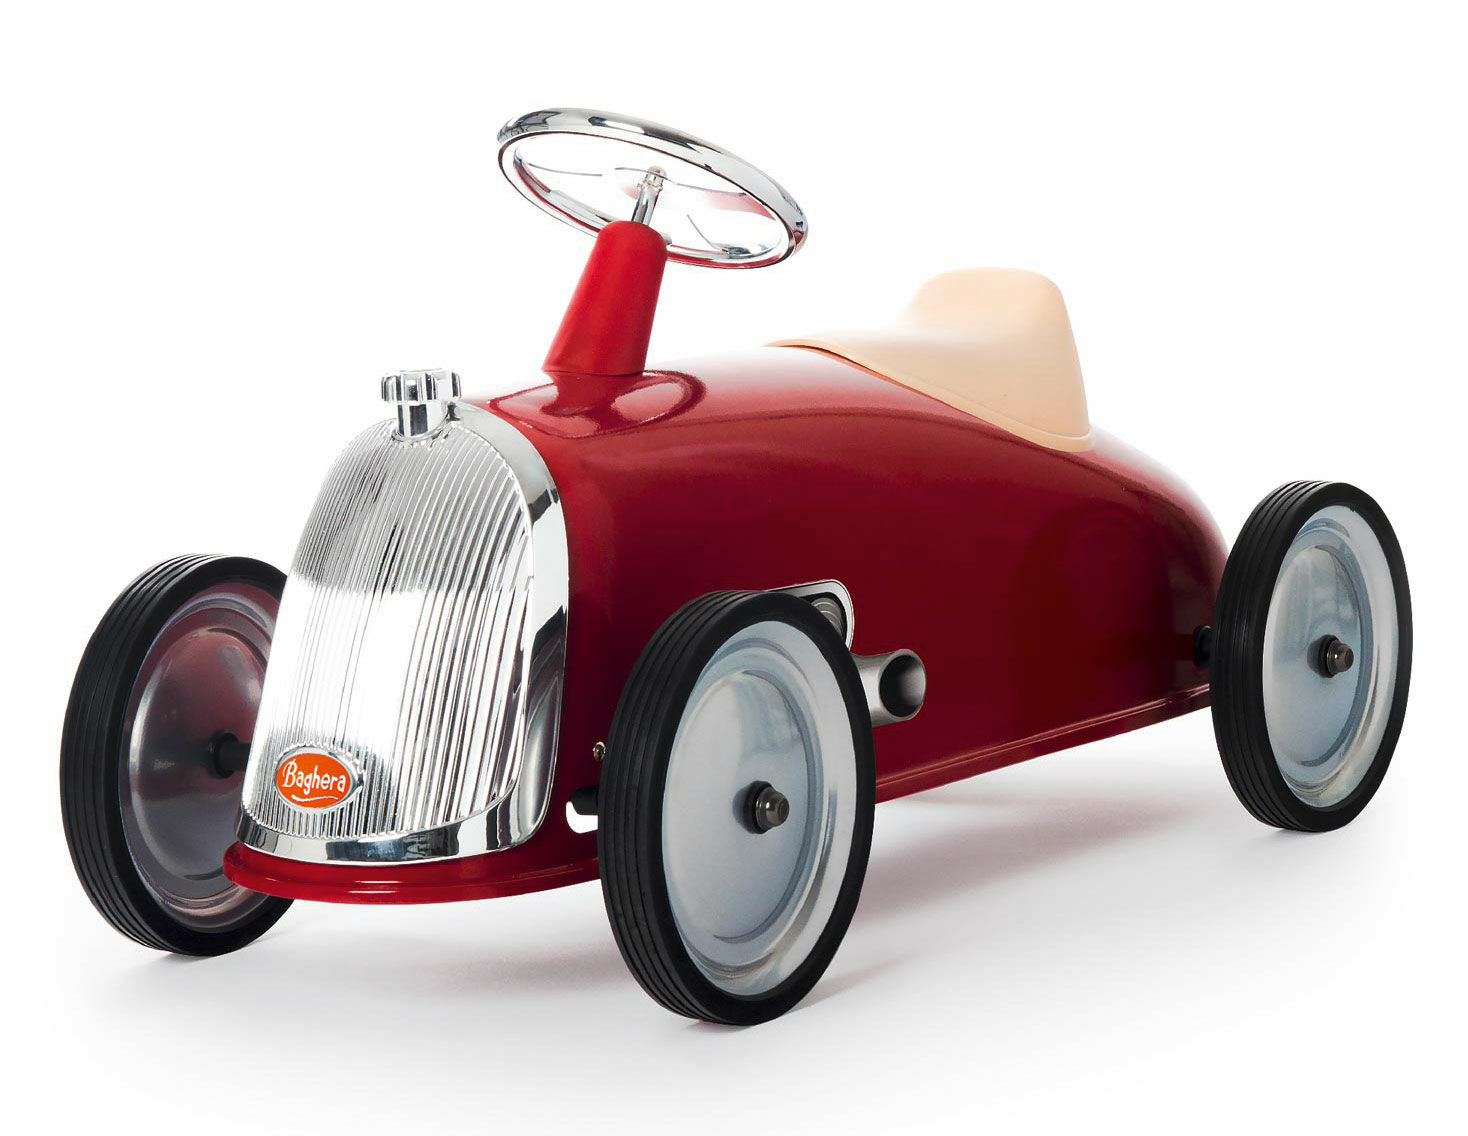 Ride-on car "Red Rider" (for children from 2-3 years) by Baghera